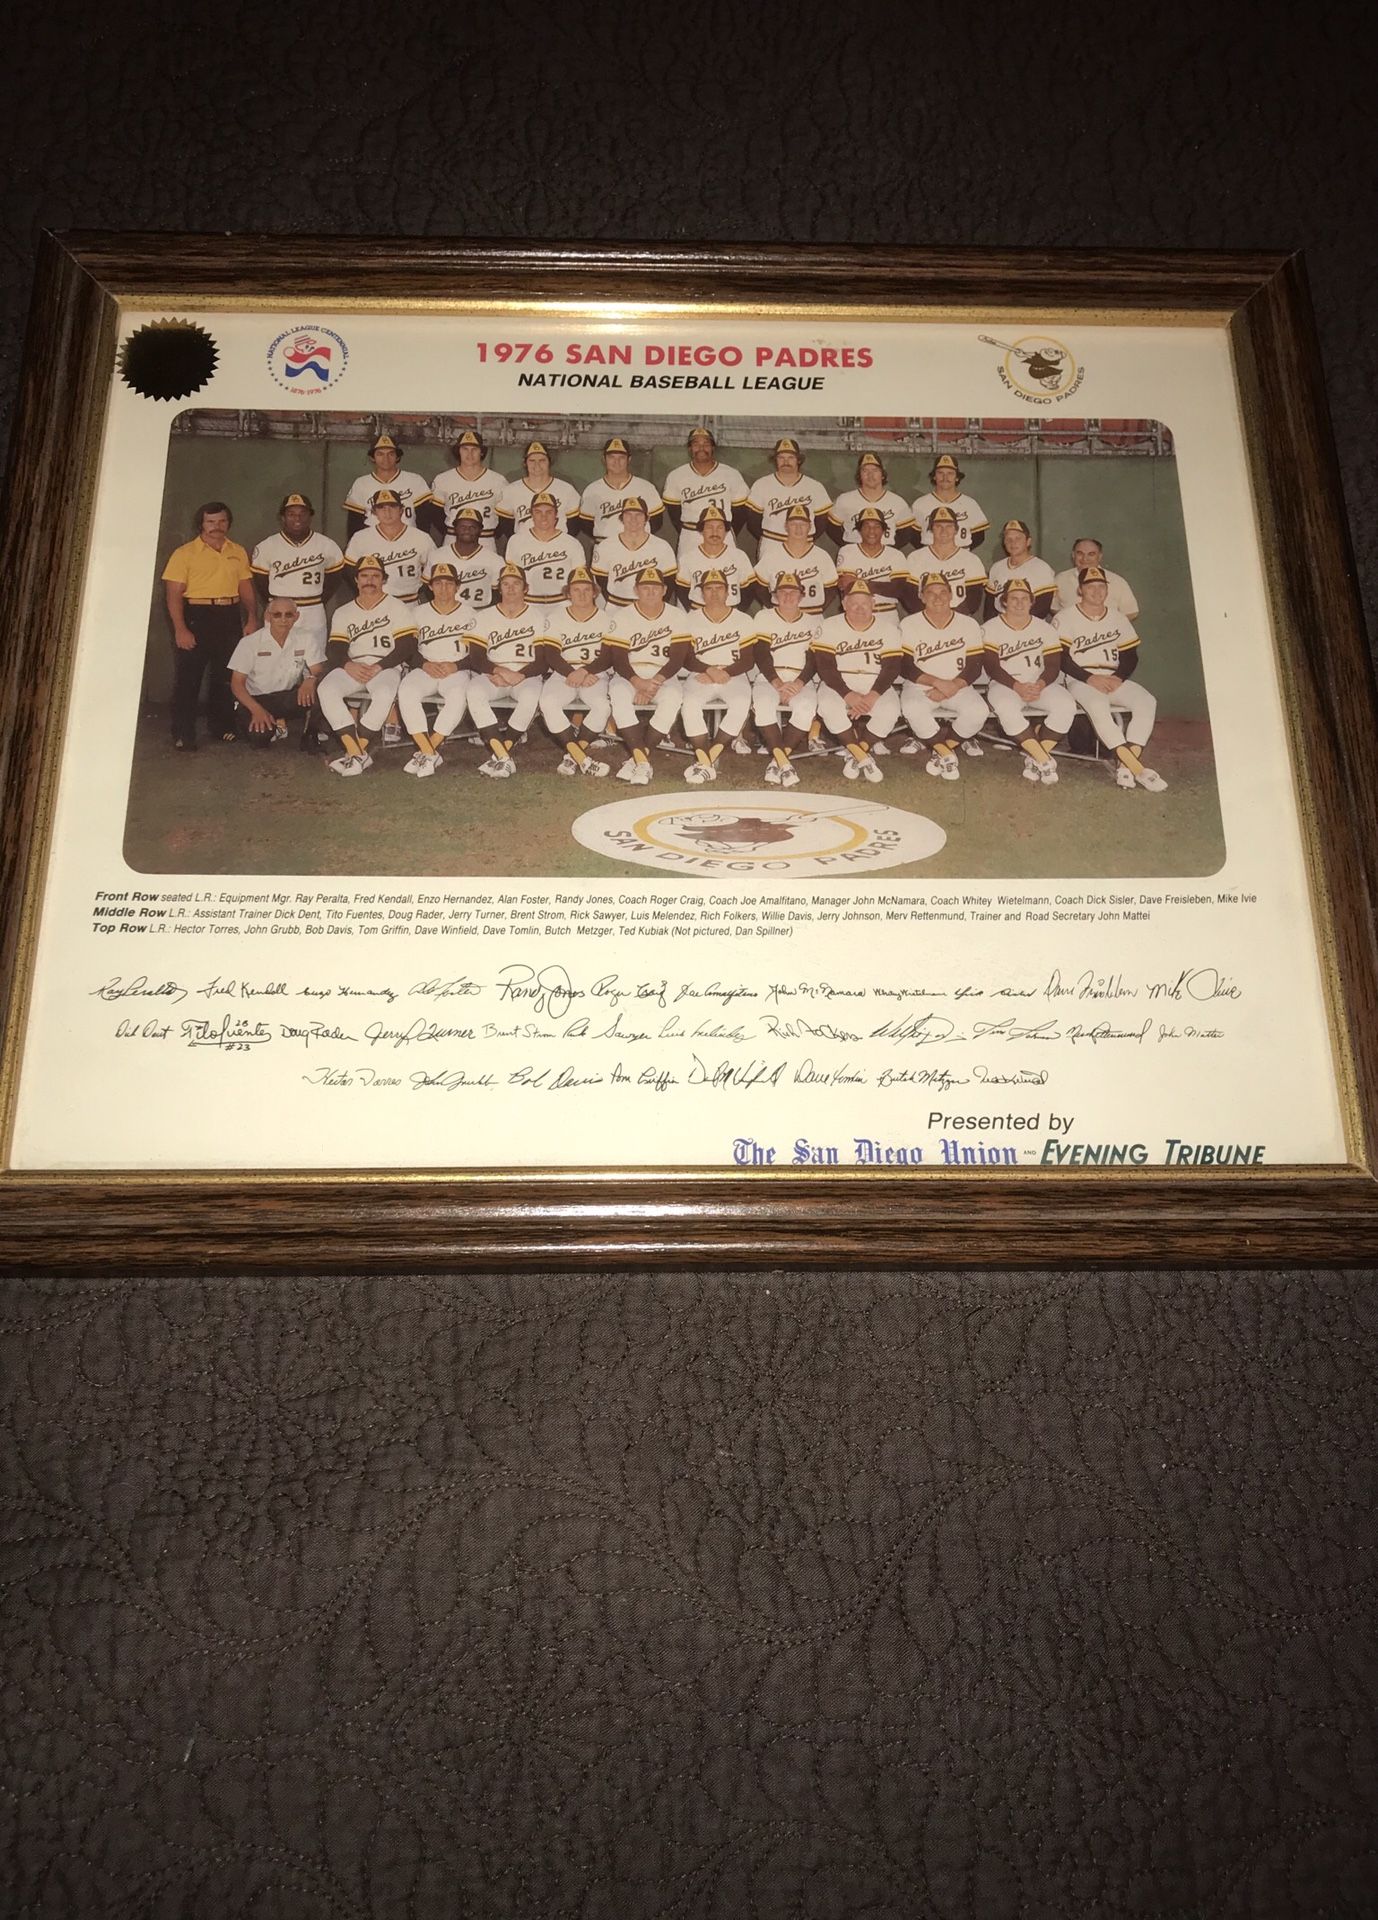 1976 San Diego Padres Autographed Team Picture